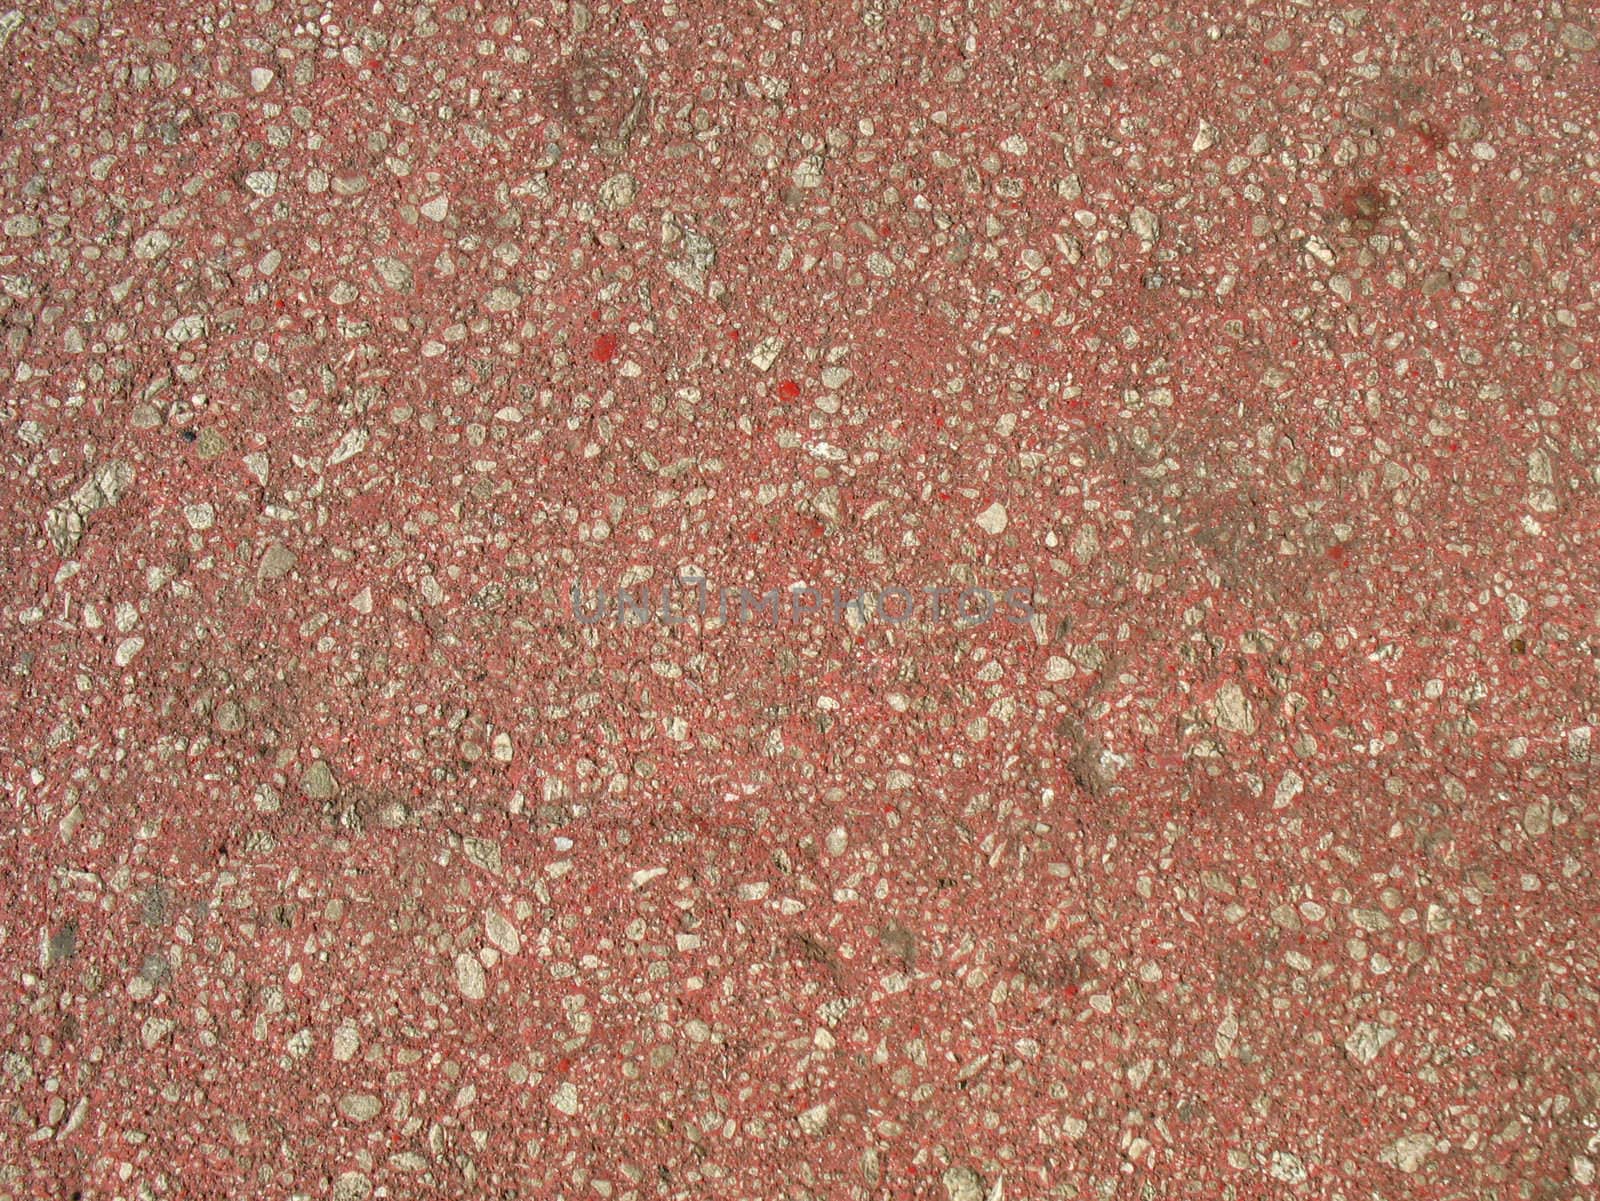  A structure of pink asphalt with impregnations.